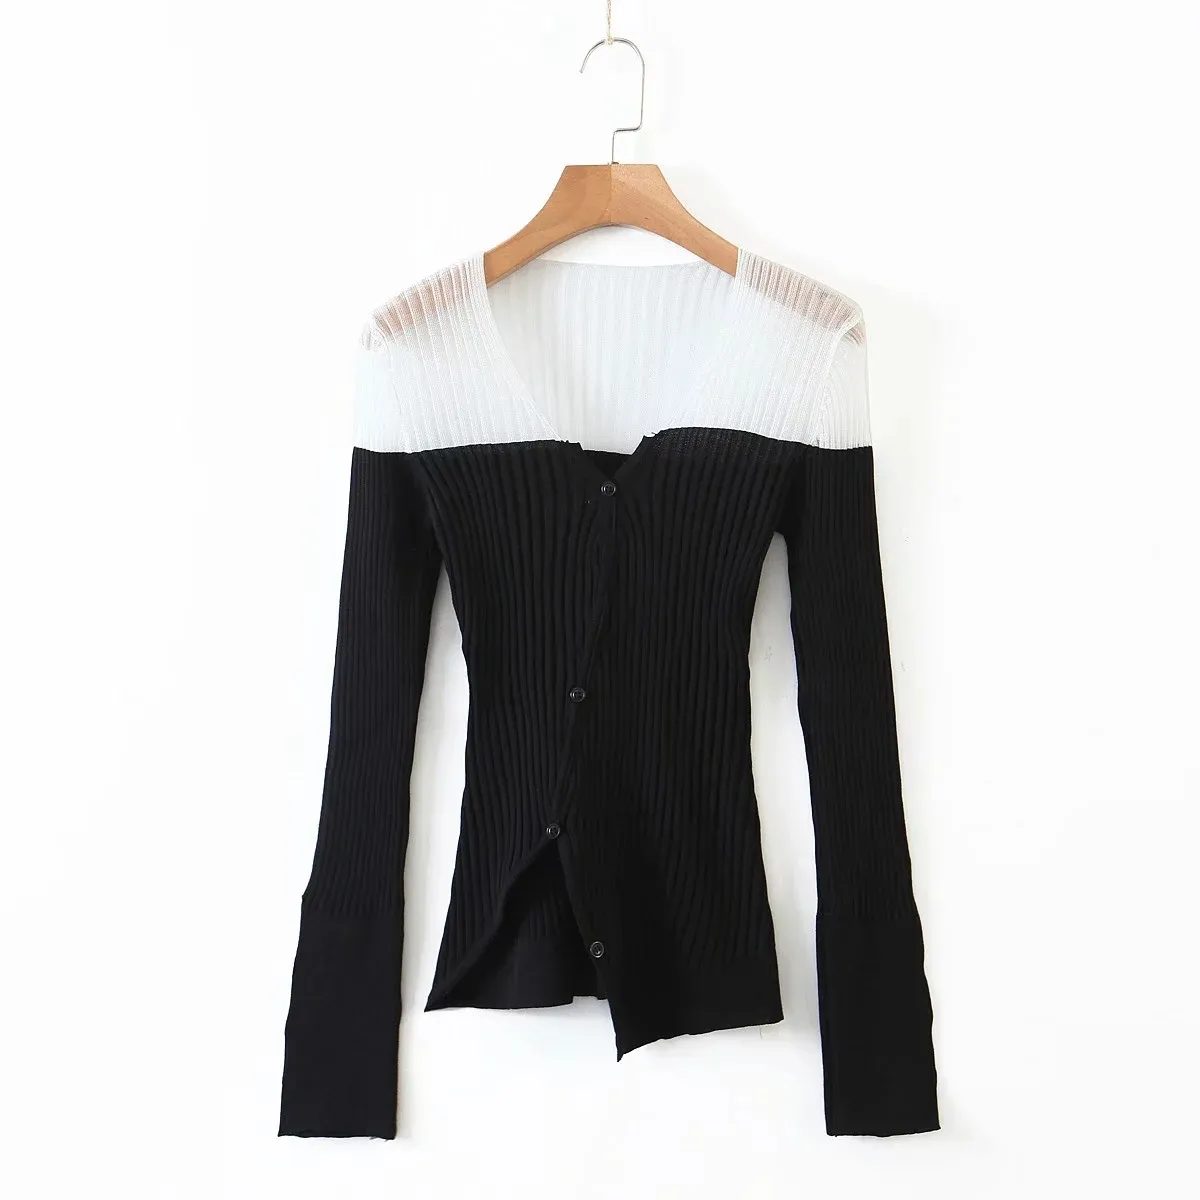 Foridol knitted transparent cropped cardigan long sleeve slim casual sheer sweater tops vintage irregualr cardigans 210415